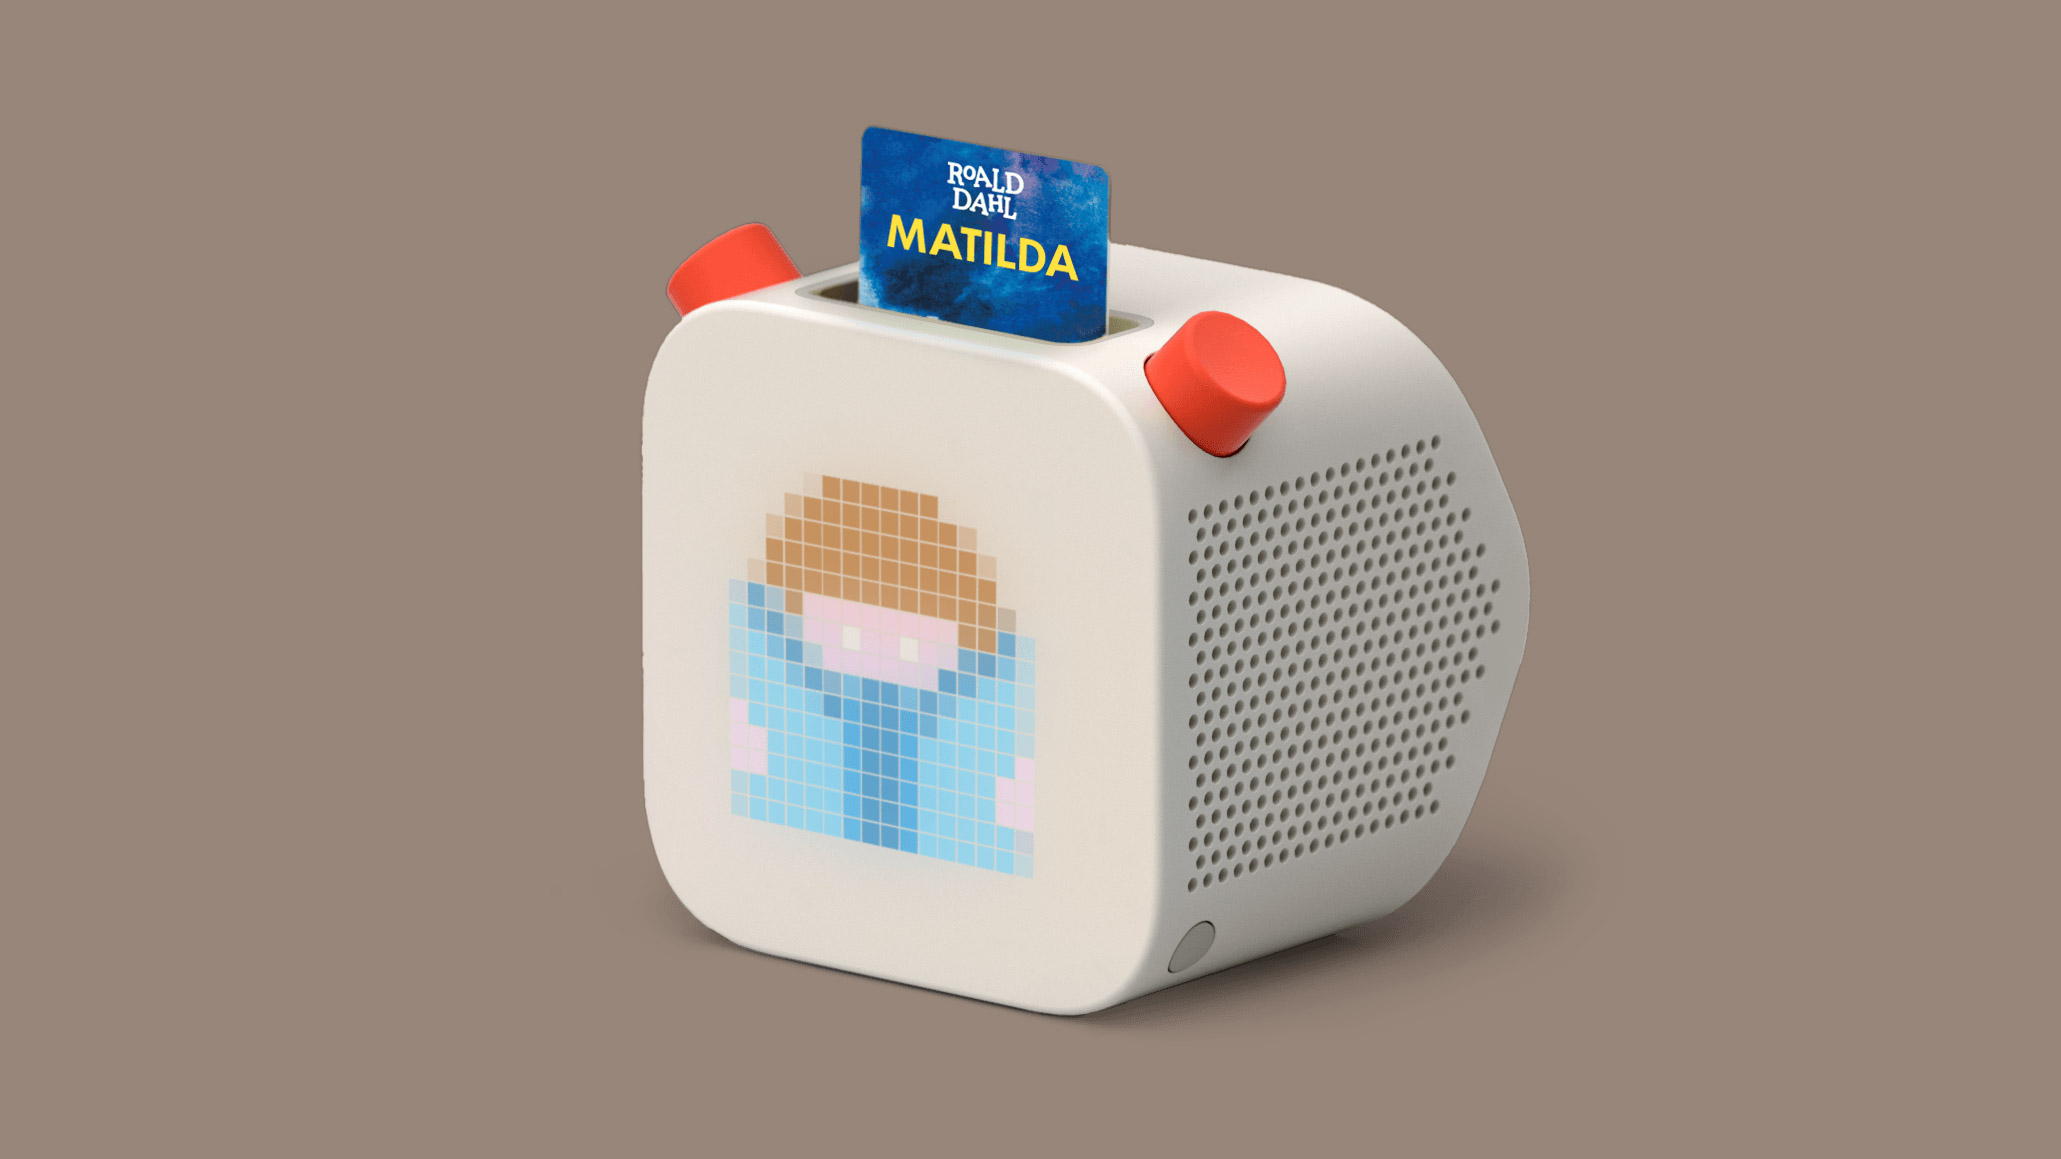 image of white radio looking box with a slot inserted that reads matilda yoto audio device for kids